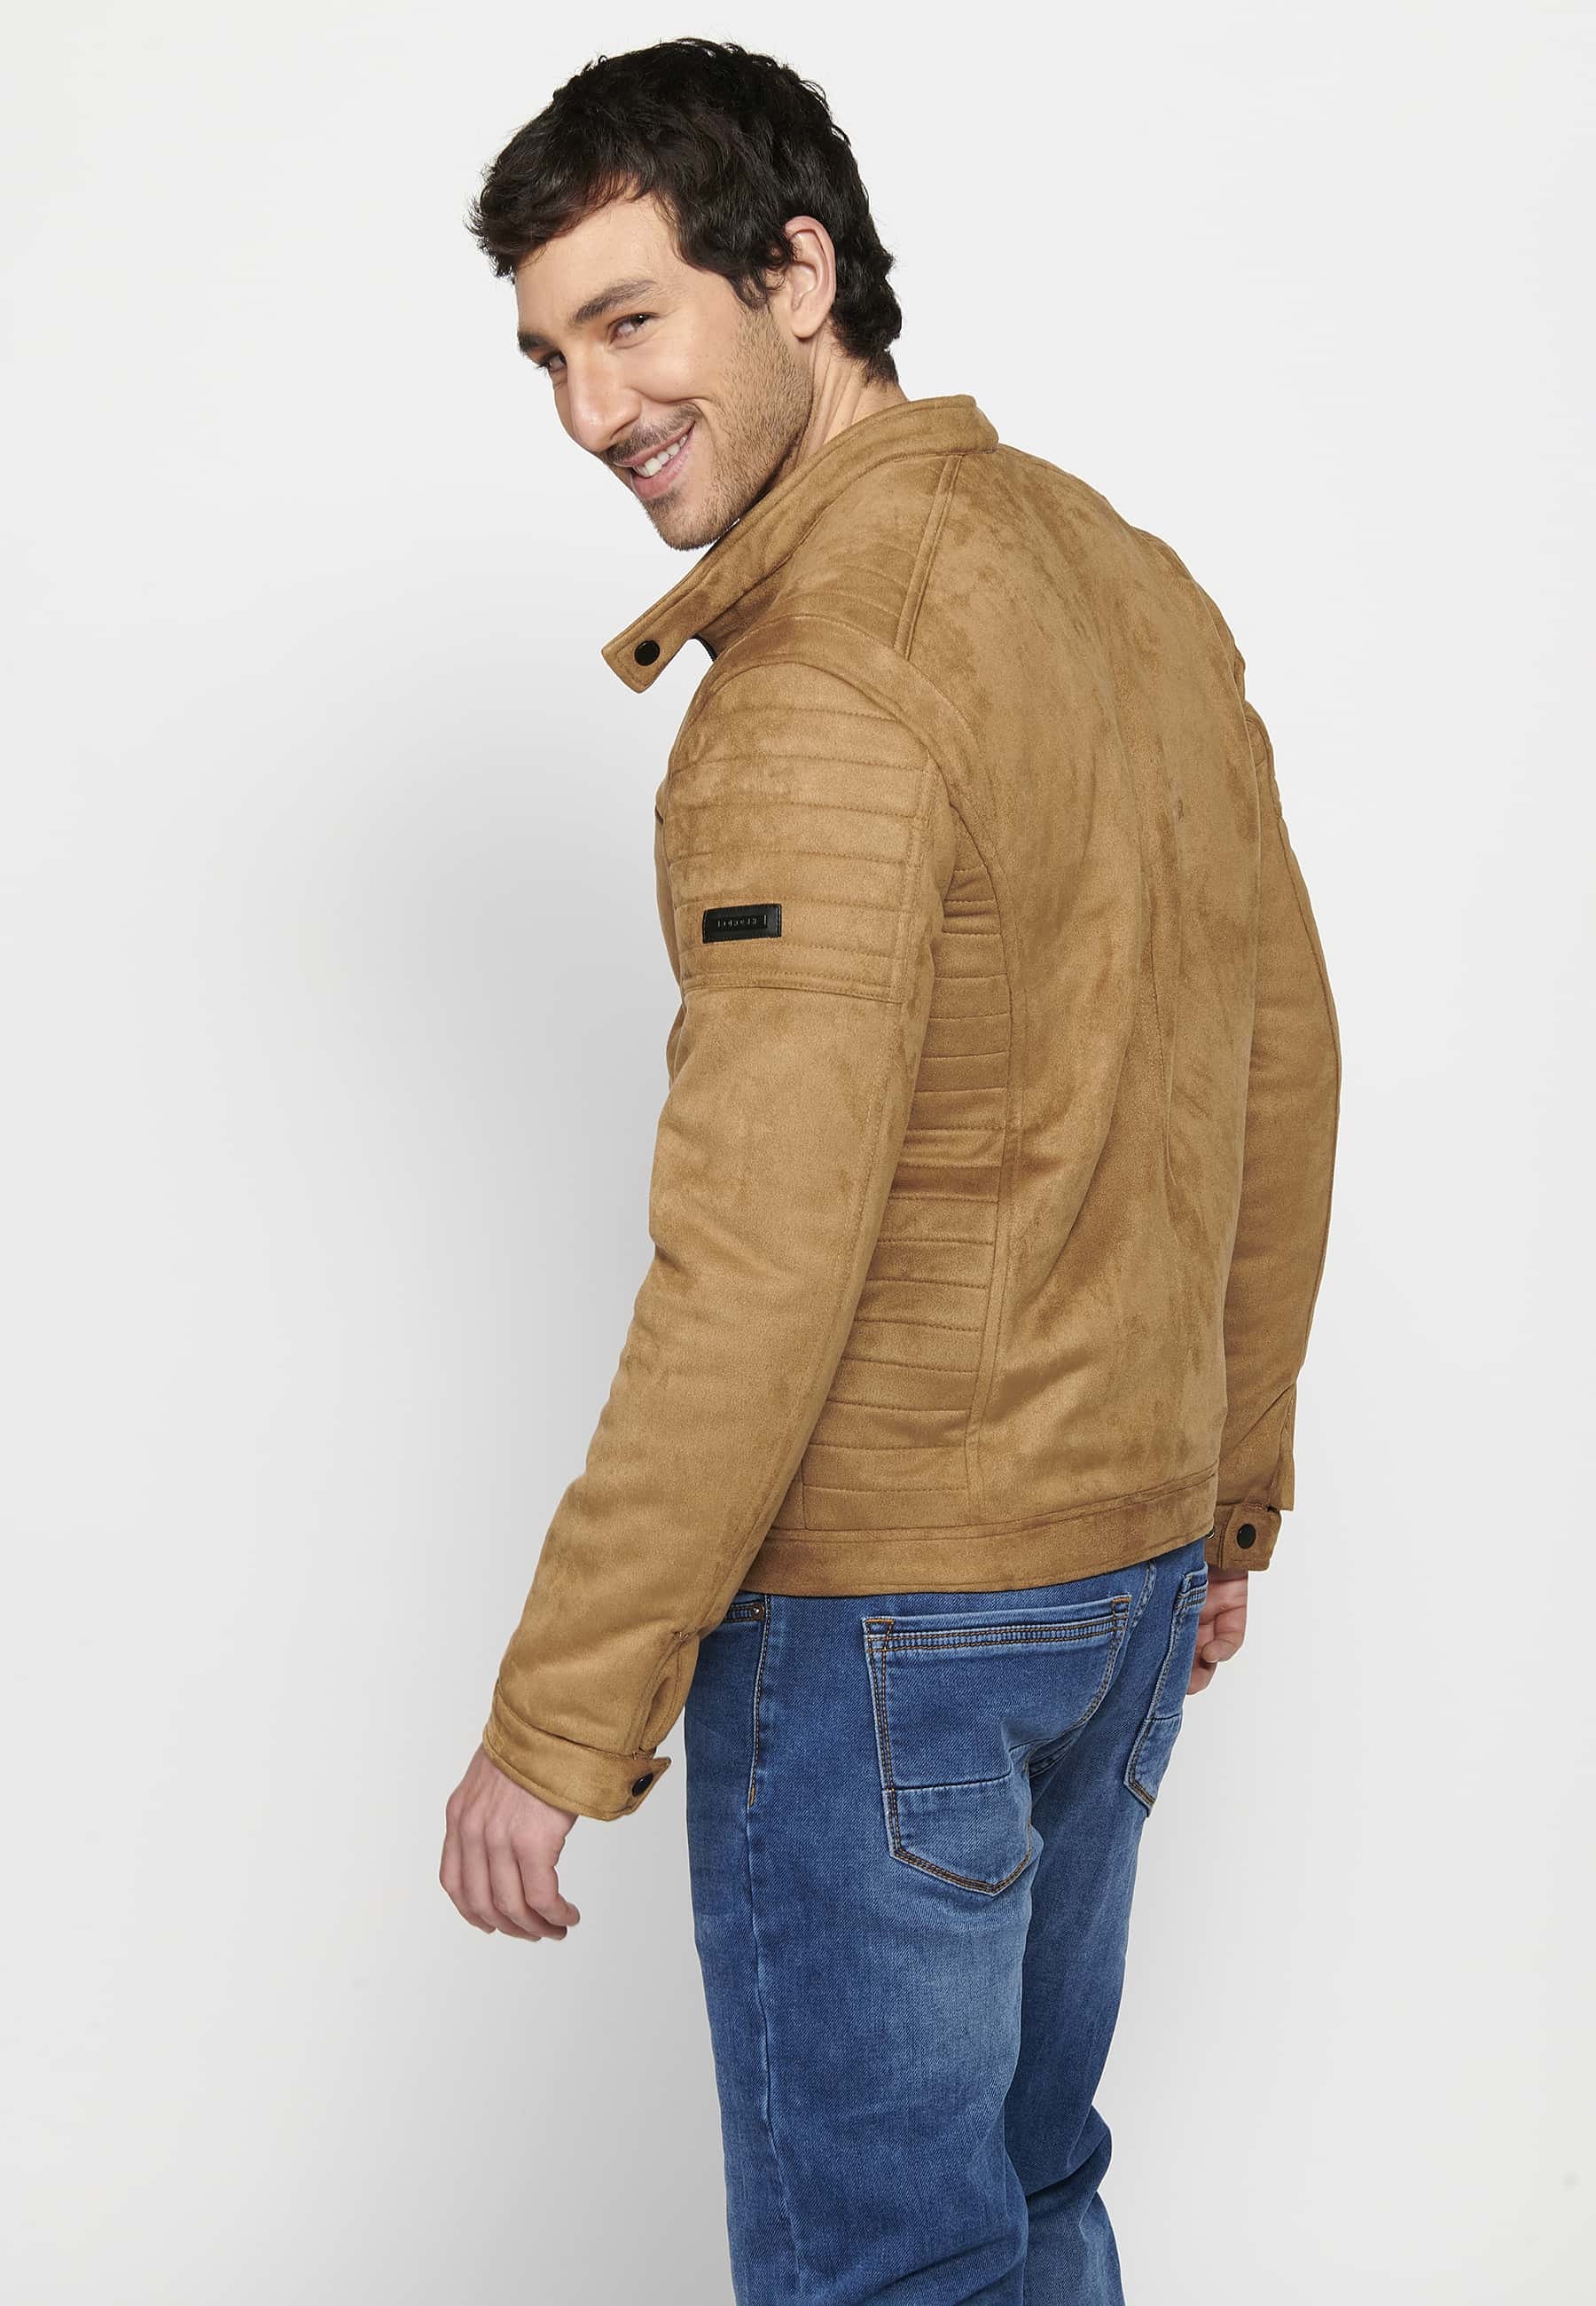 Men's Long Sleeve Jacket with Round Neck and Zipper Front Closure with Four Pockets in Tan Color 8